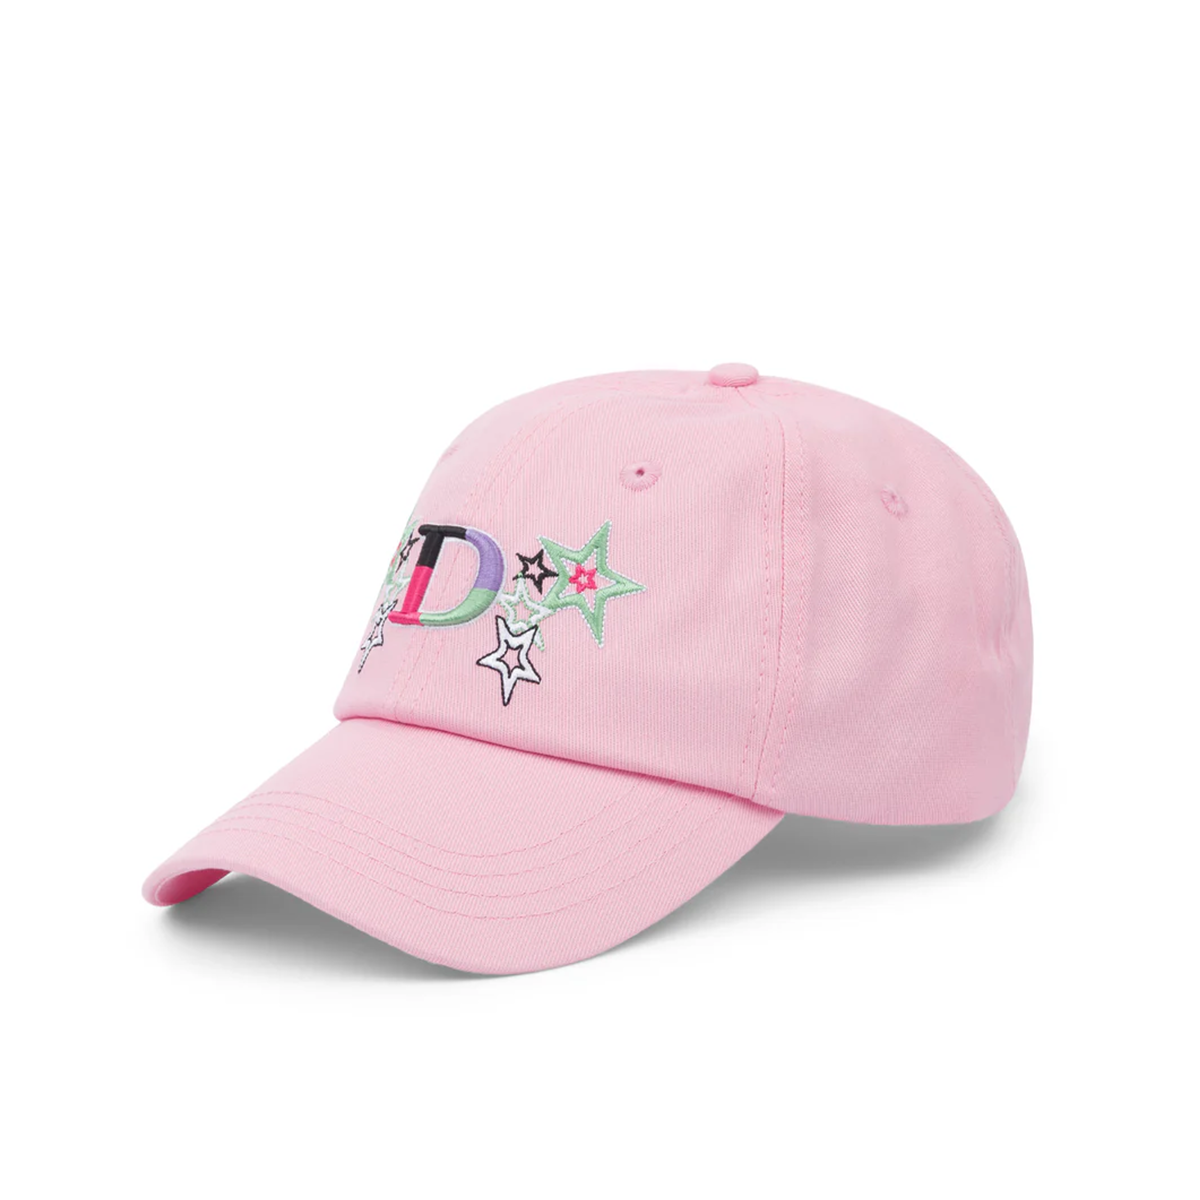 Dime Star D Low Pro Cap - Baby Pink